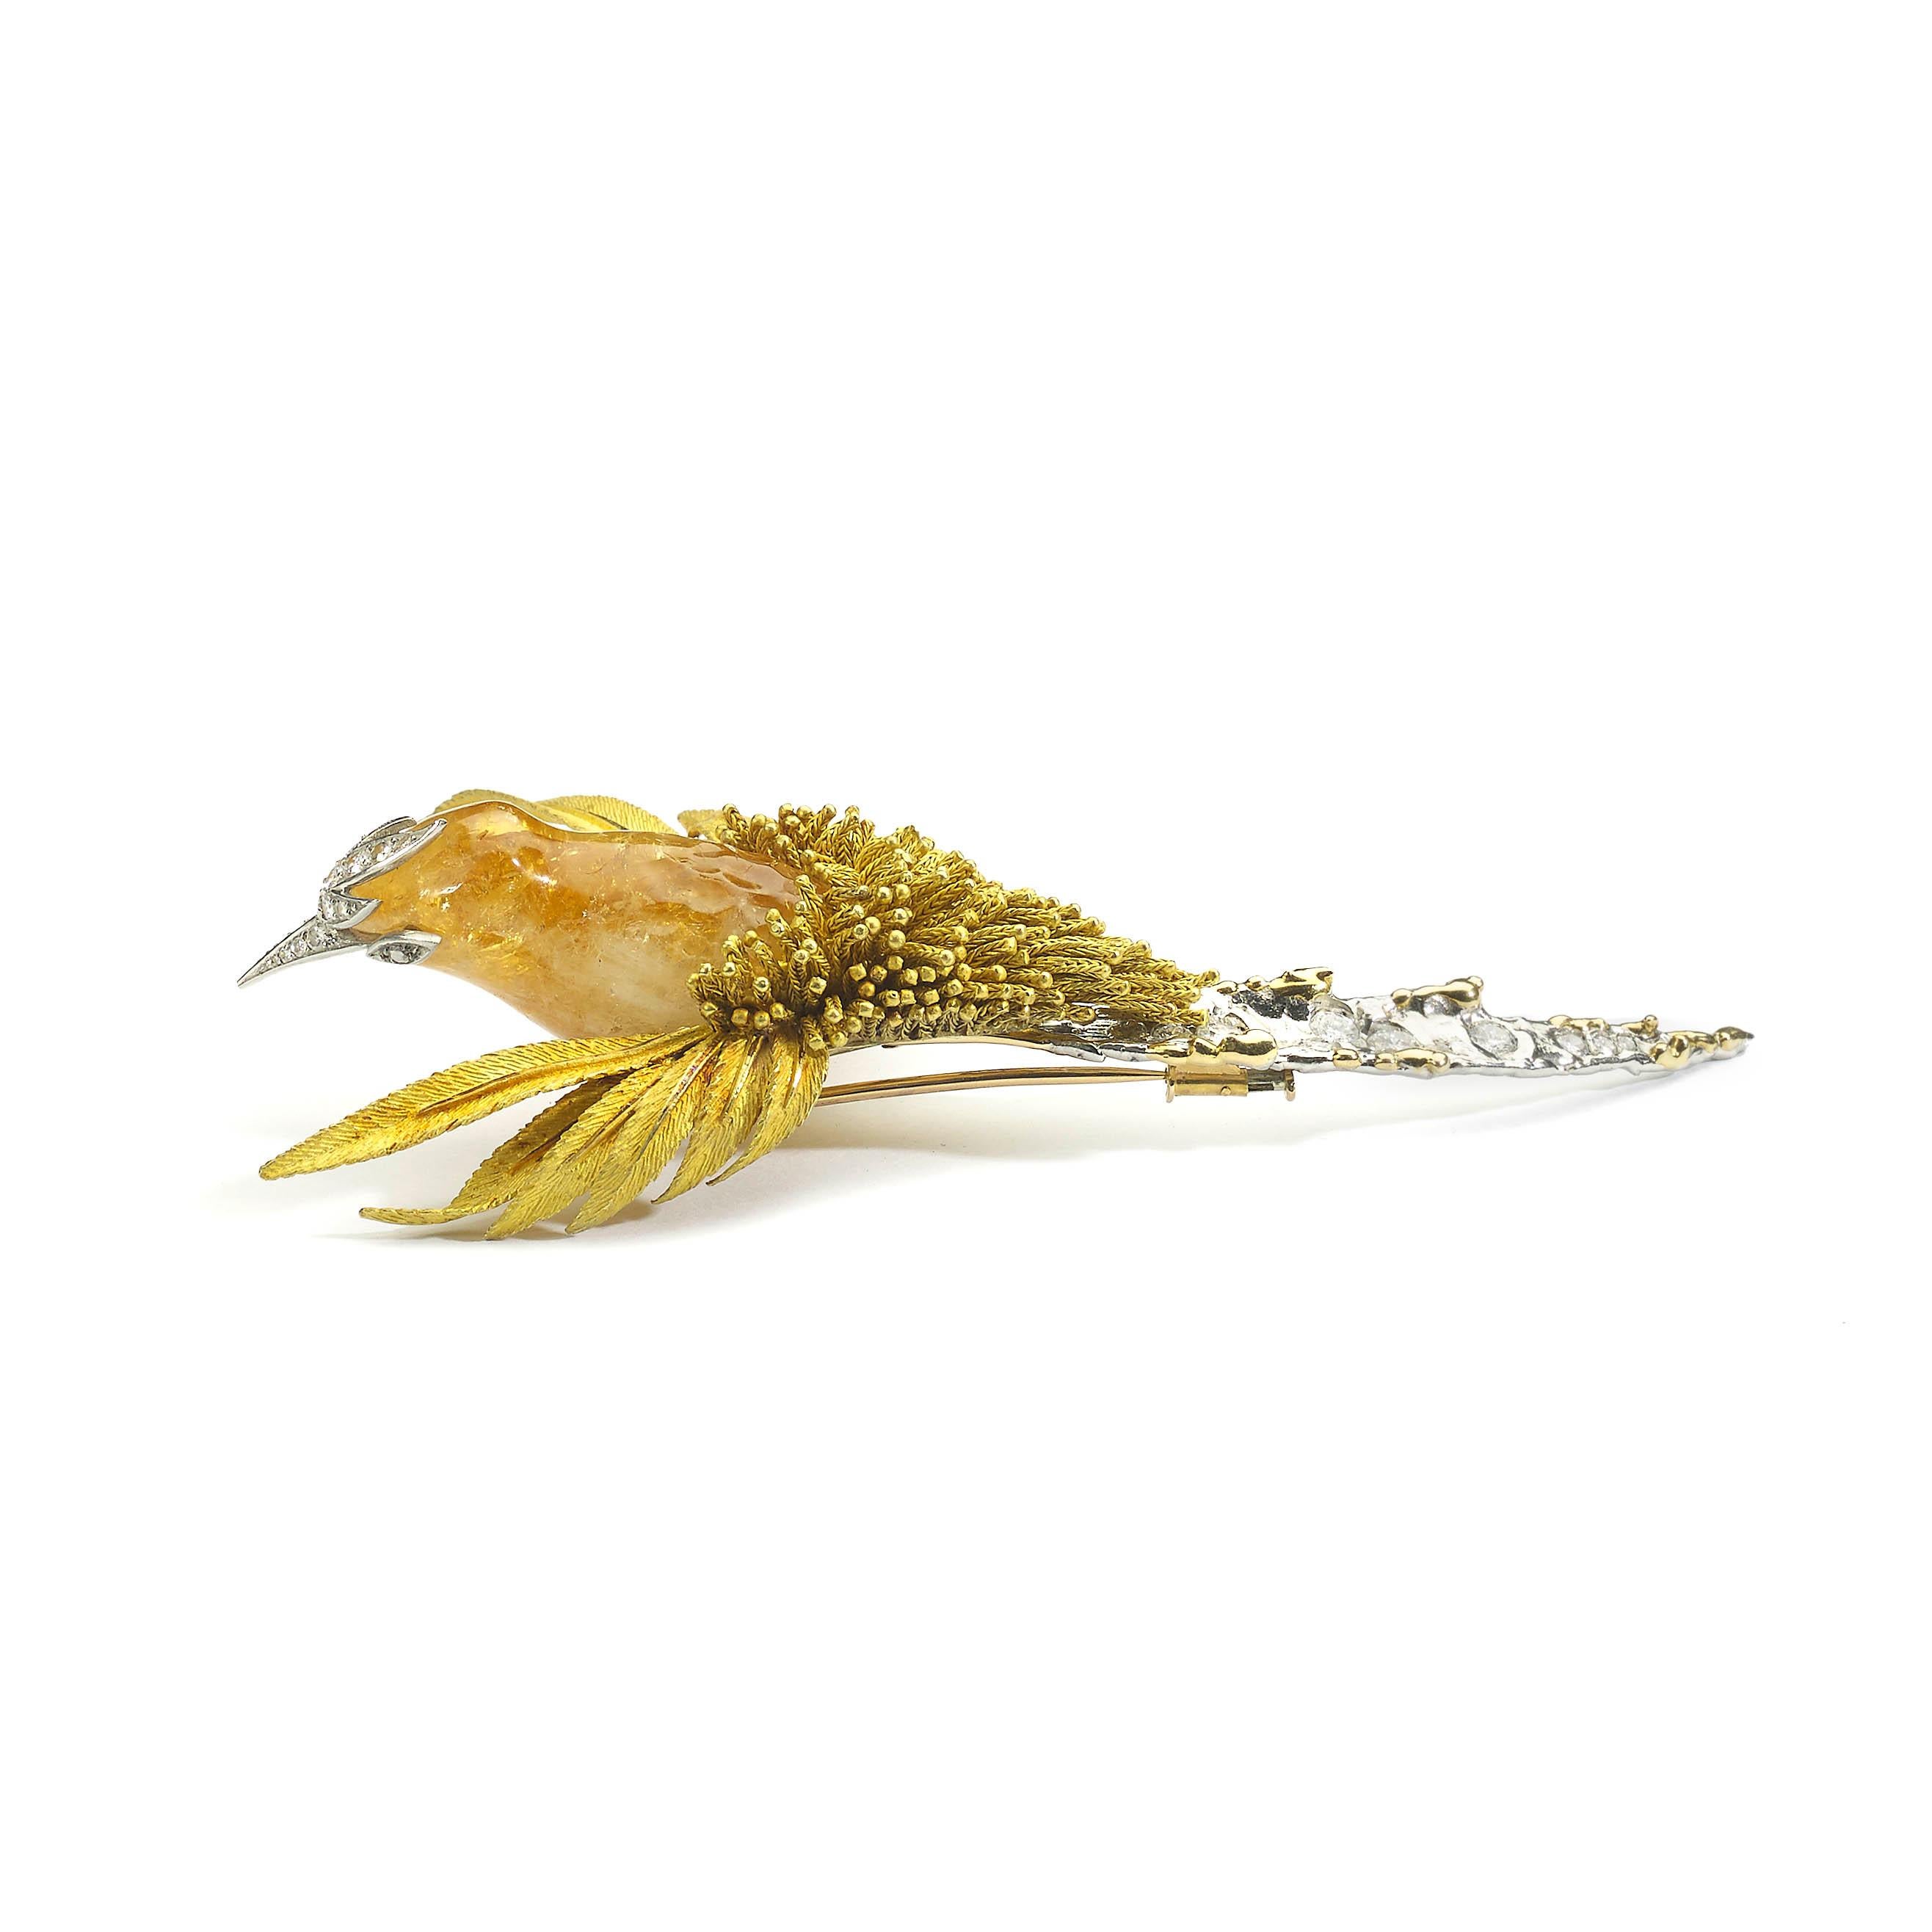 A rare gold, diamond and gem set bird brooch by Sterlé. The gold textured wings are spread as if the bird is in flight. The body is carved out of citrine quartz suspending multi gold tassels above a gold and diamond set tail and back, circa 1965.
